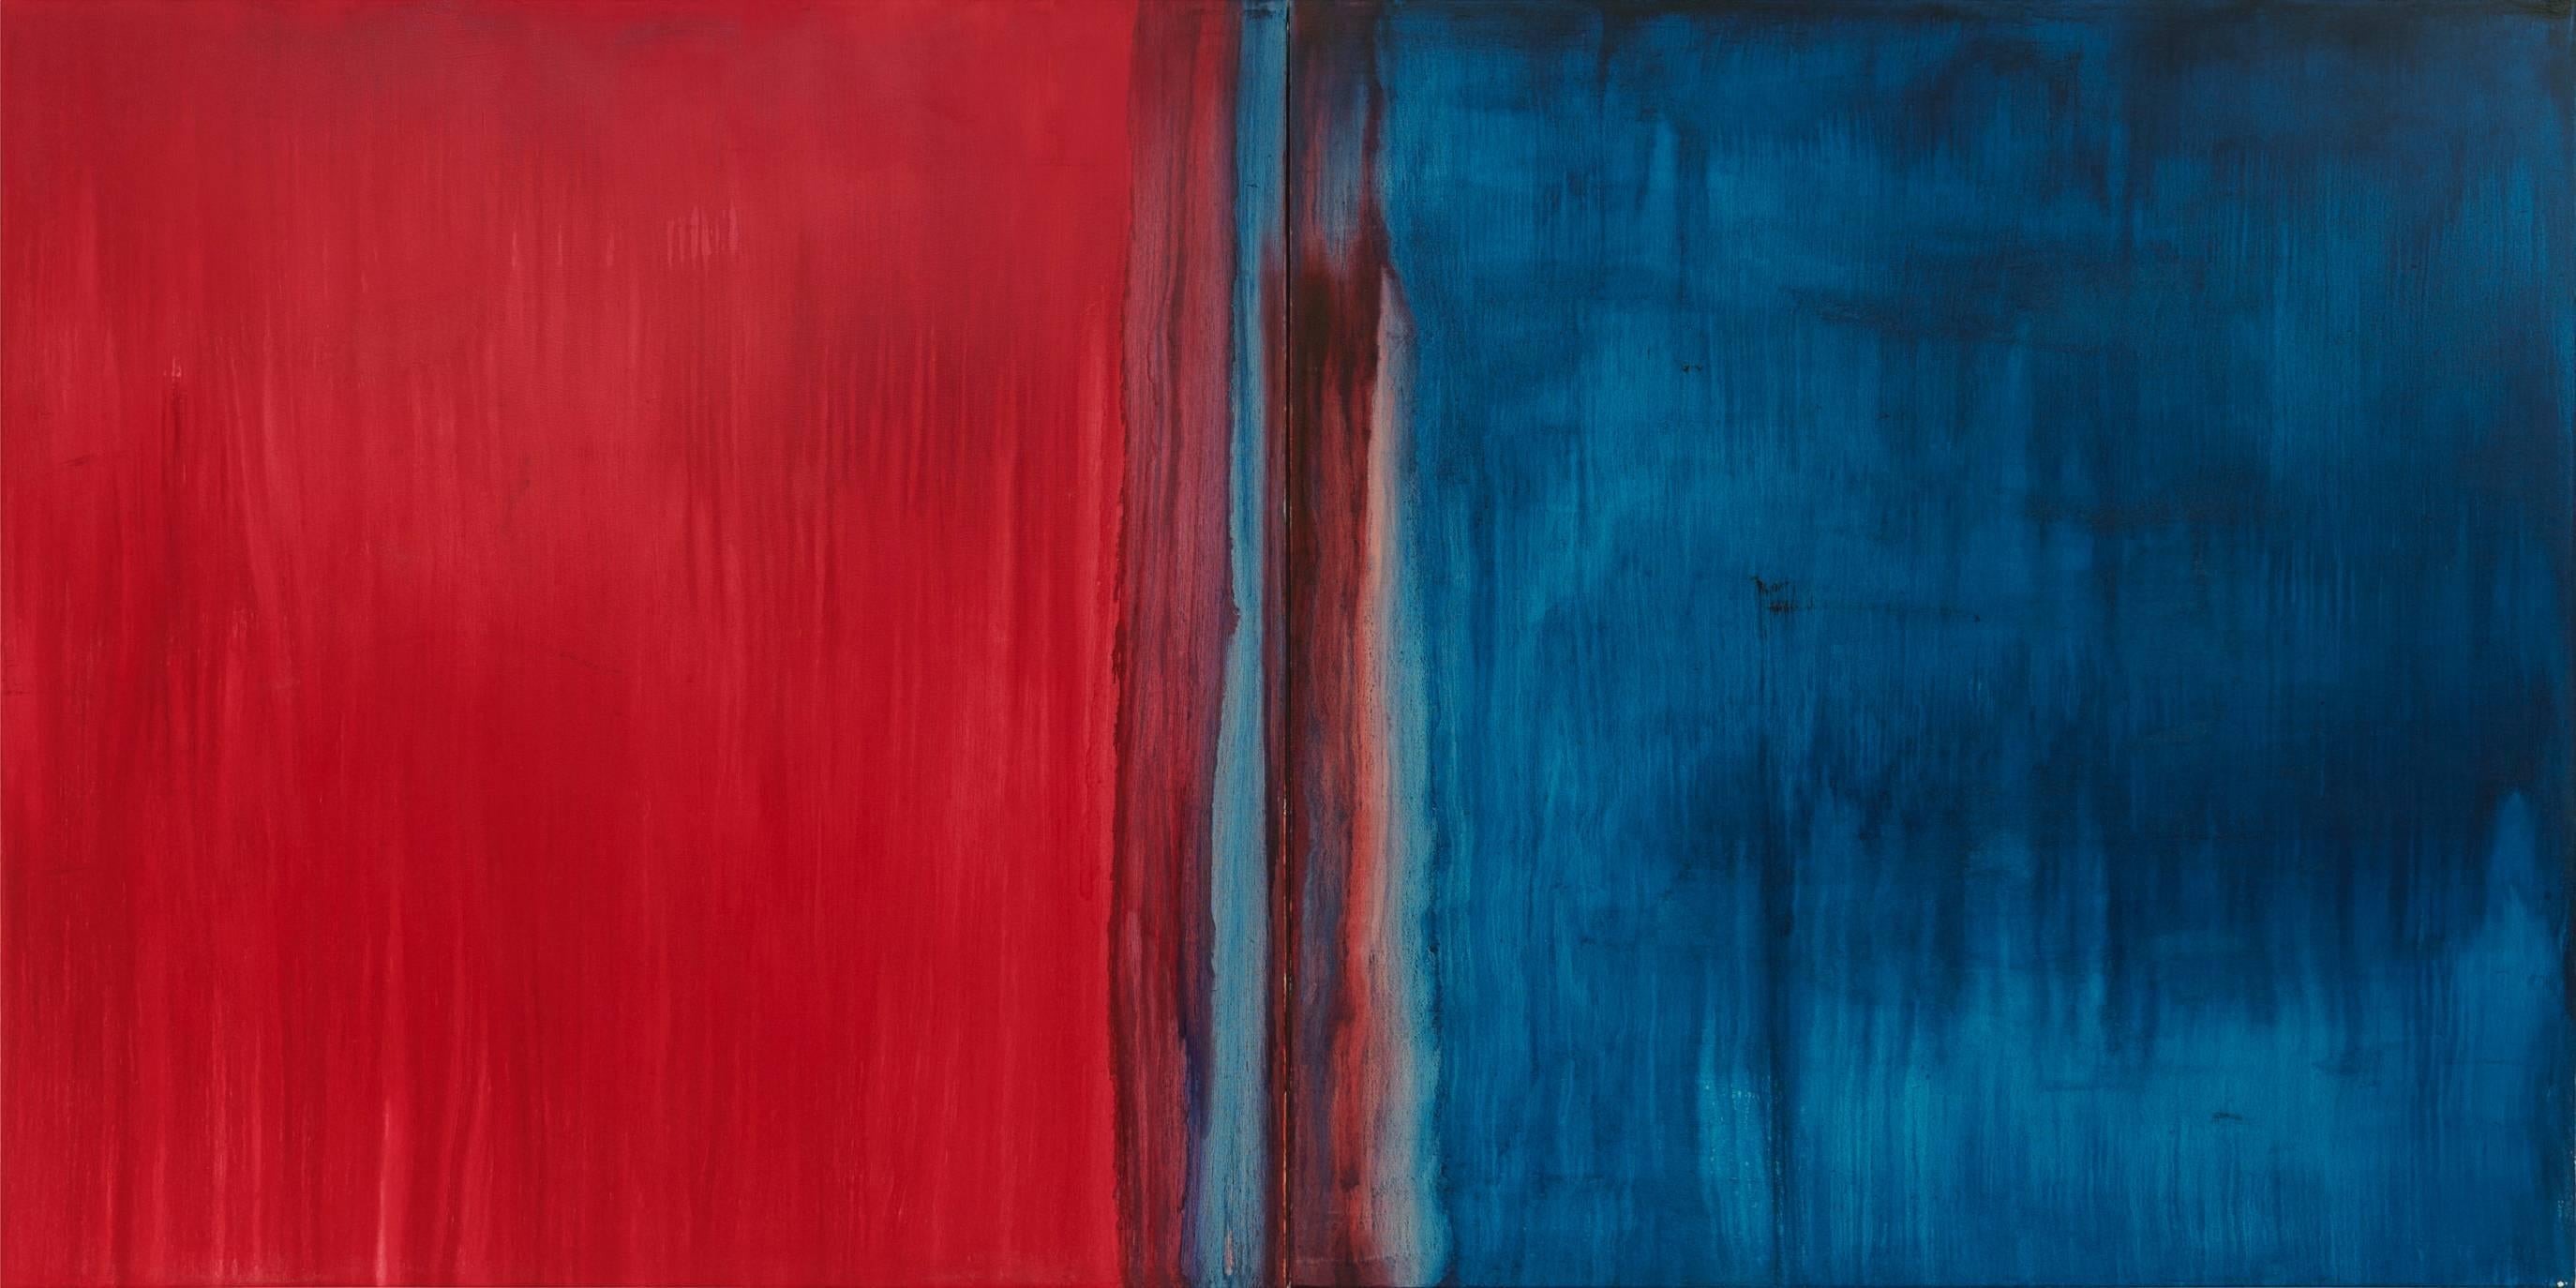 Anastasia Pelias Abstract Painting - Ritual Devotion Two (madder root tone, prussian paris blue)